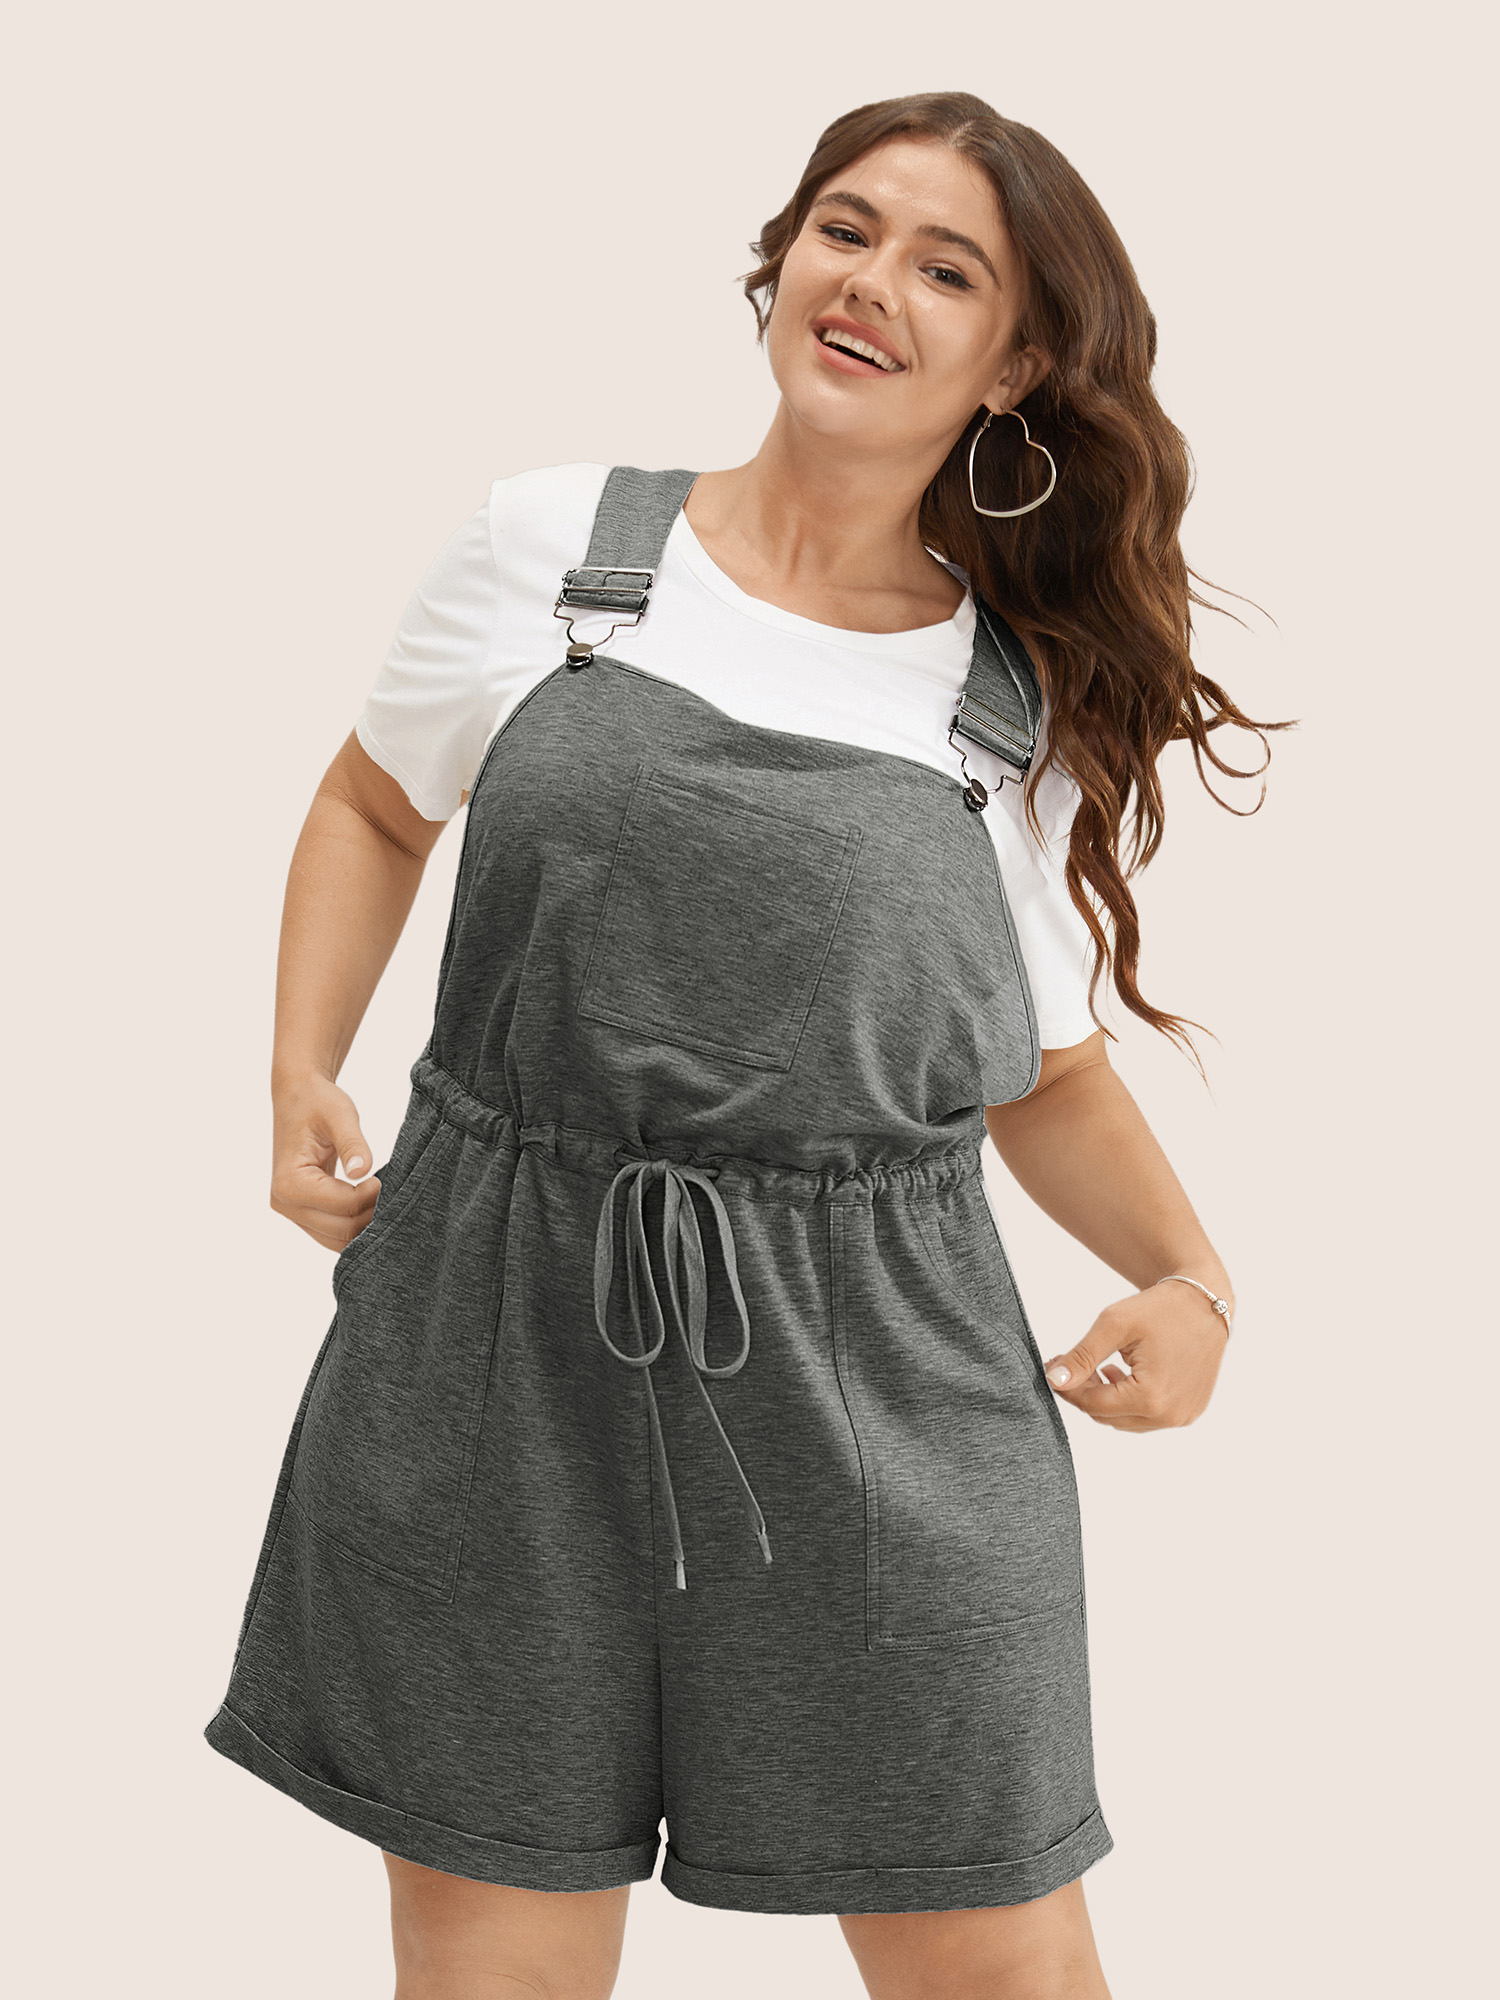 

Plus Size DimGray Solid Pocket Drawstring Overall Romper Women Casual Sleeveless Non Everyday Loose Jumpsuits BloomChic